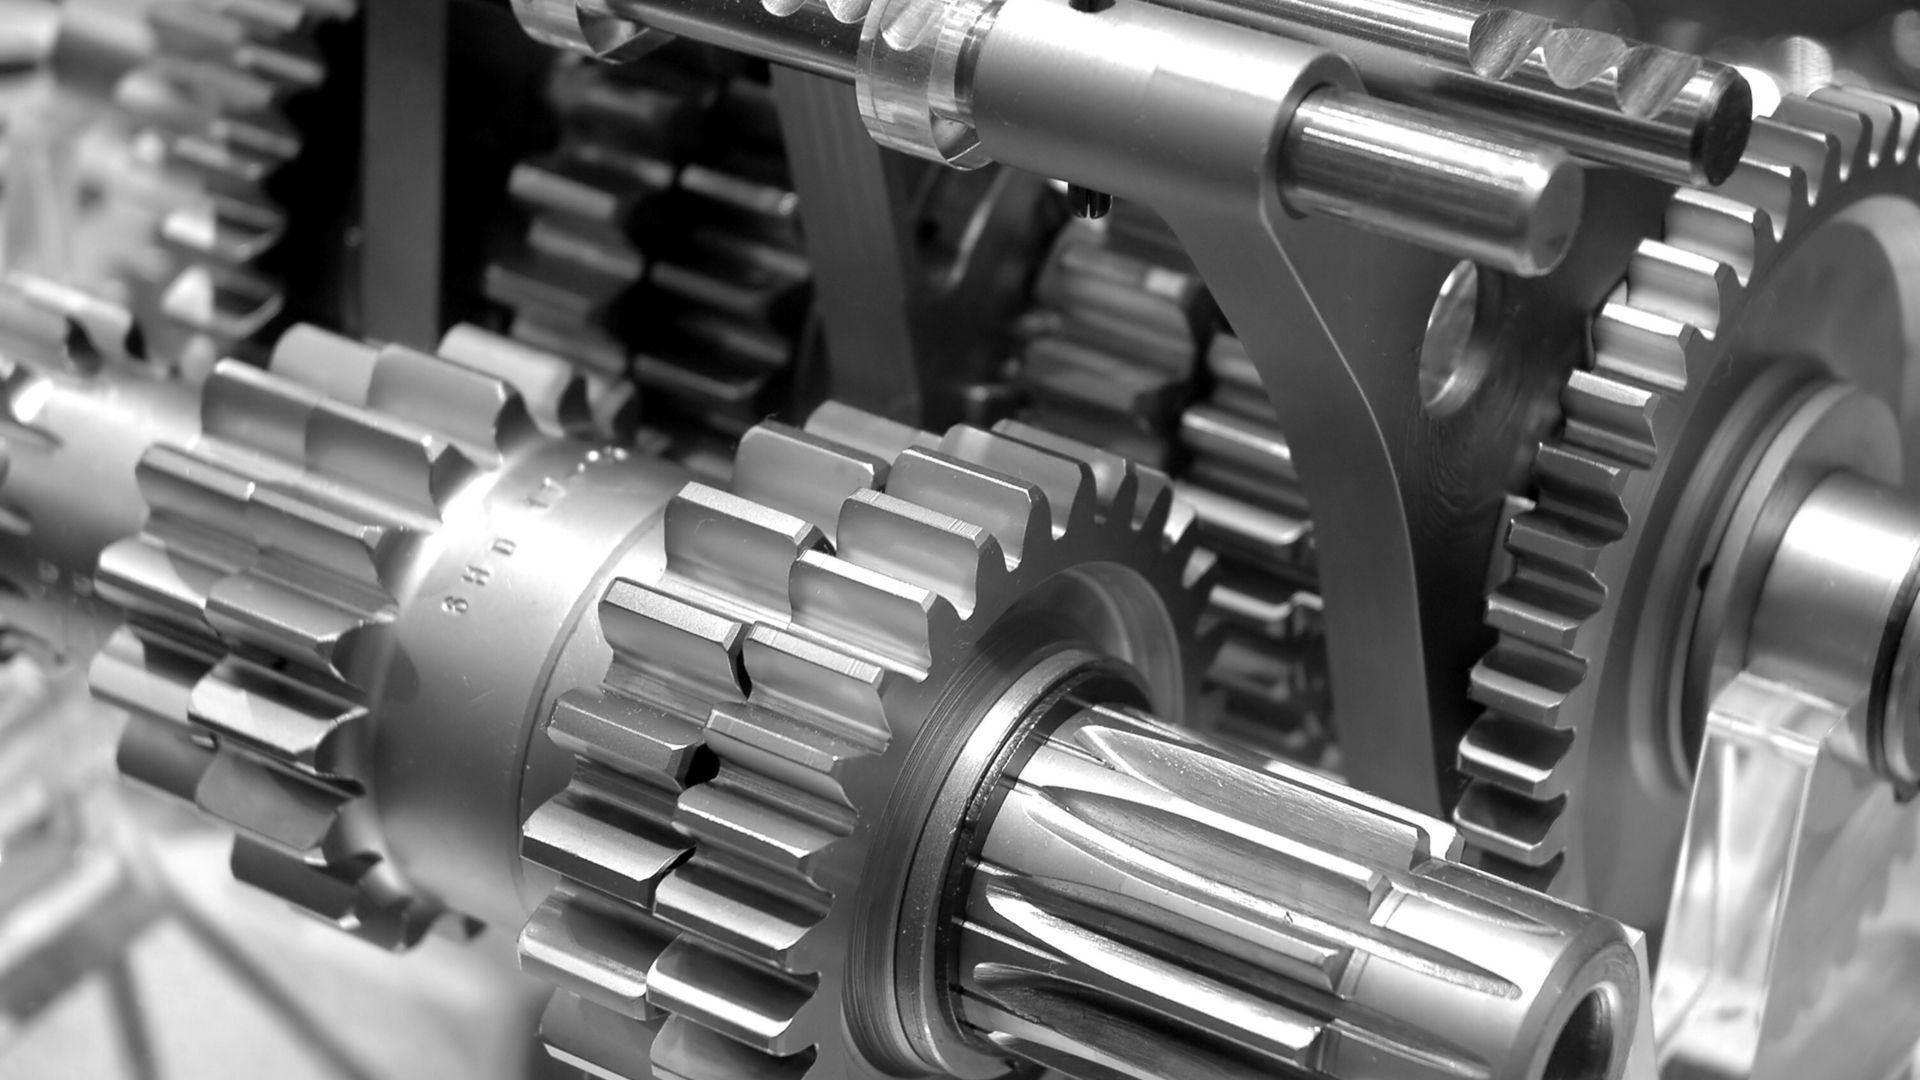 Mechanical Engineering Wallpapers, HD Mechanical Engineering Backgrounds,  Free Images Download